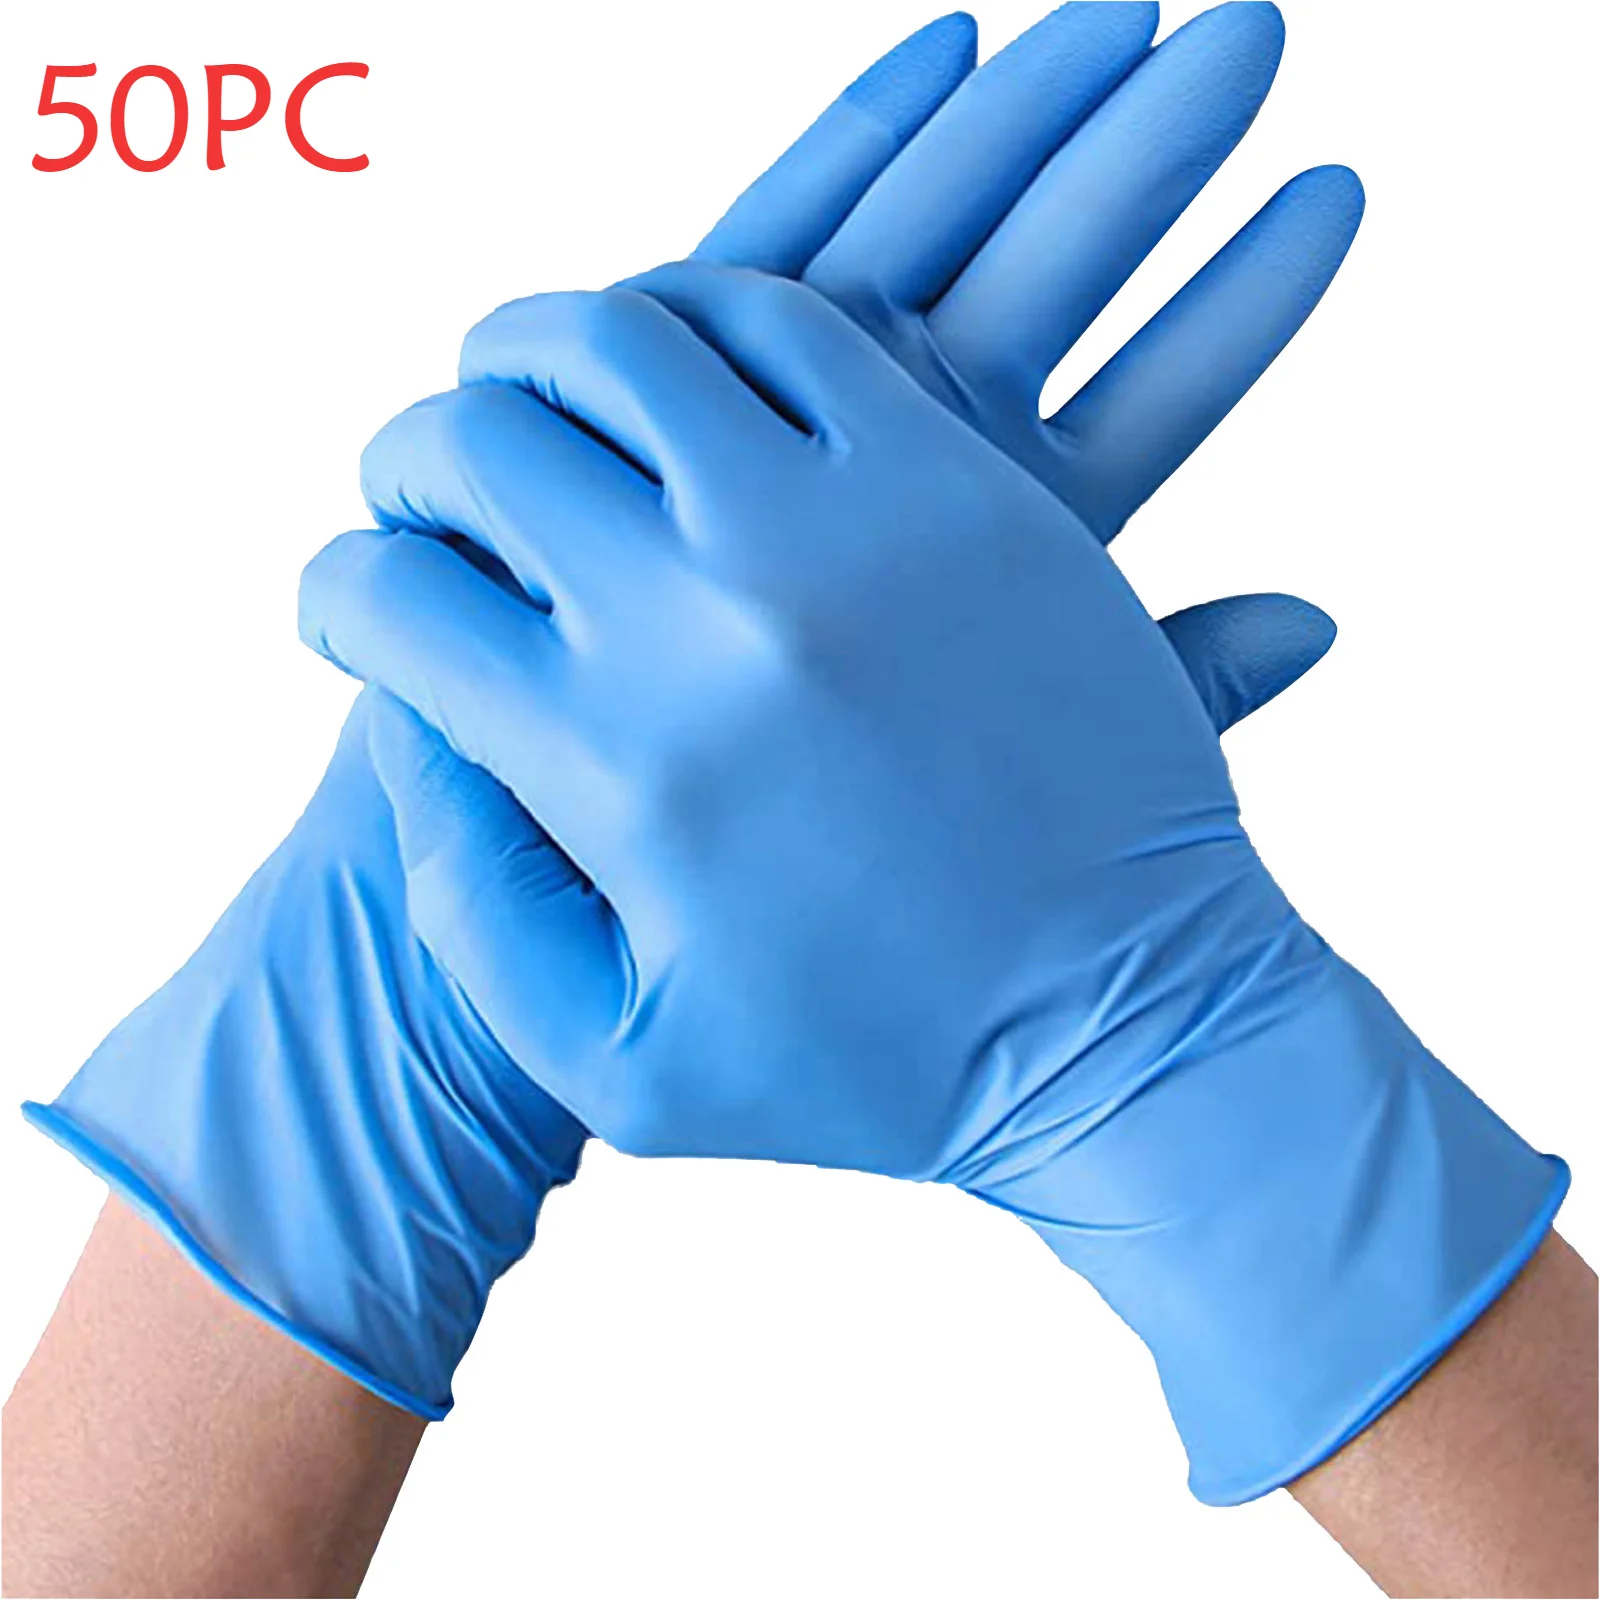 Autonomie luchthaven aanvulling 50pcs Disposable Gloves Latex Nitrile Rubber Gloves for  Kitchen/Dishwashing/Work/Garden Gloves Left and Right Hand Universal